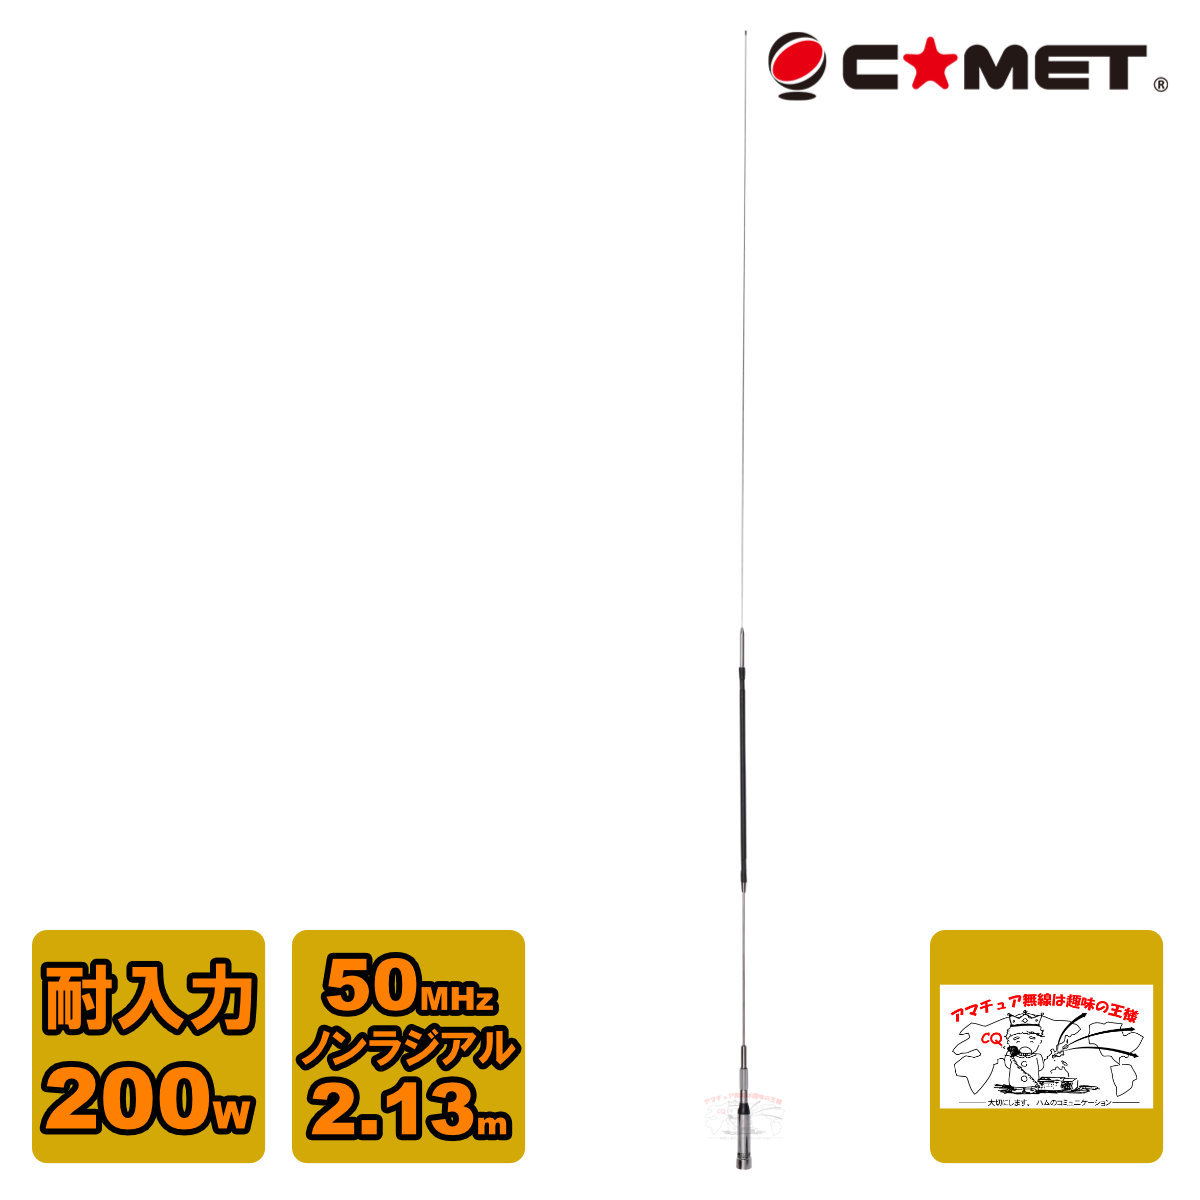 HR50 comet 50M Hz band mono band 1/2λ non radial Mobil antenna total length 2.13m